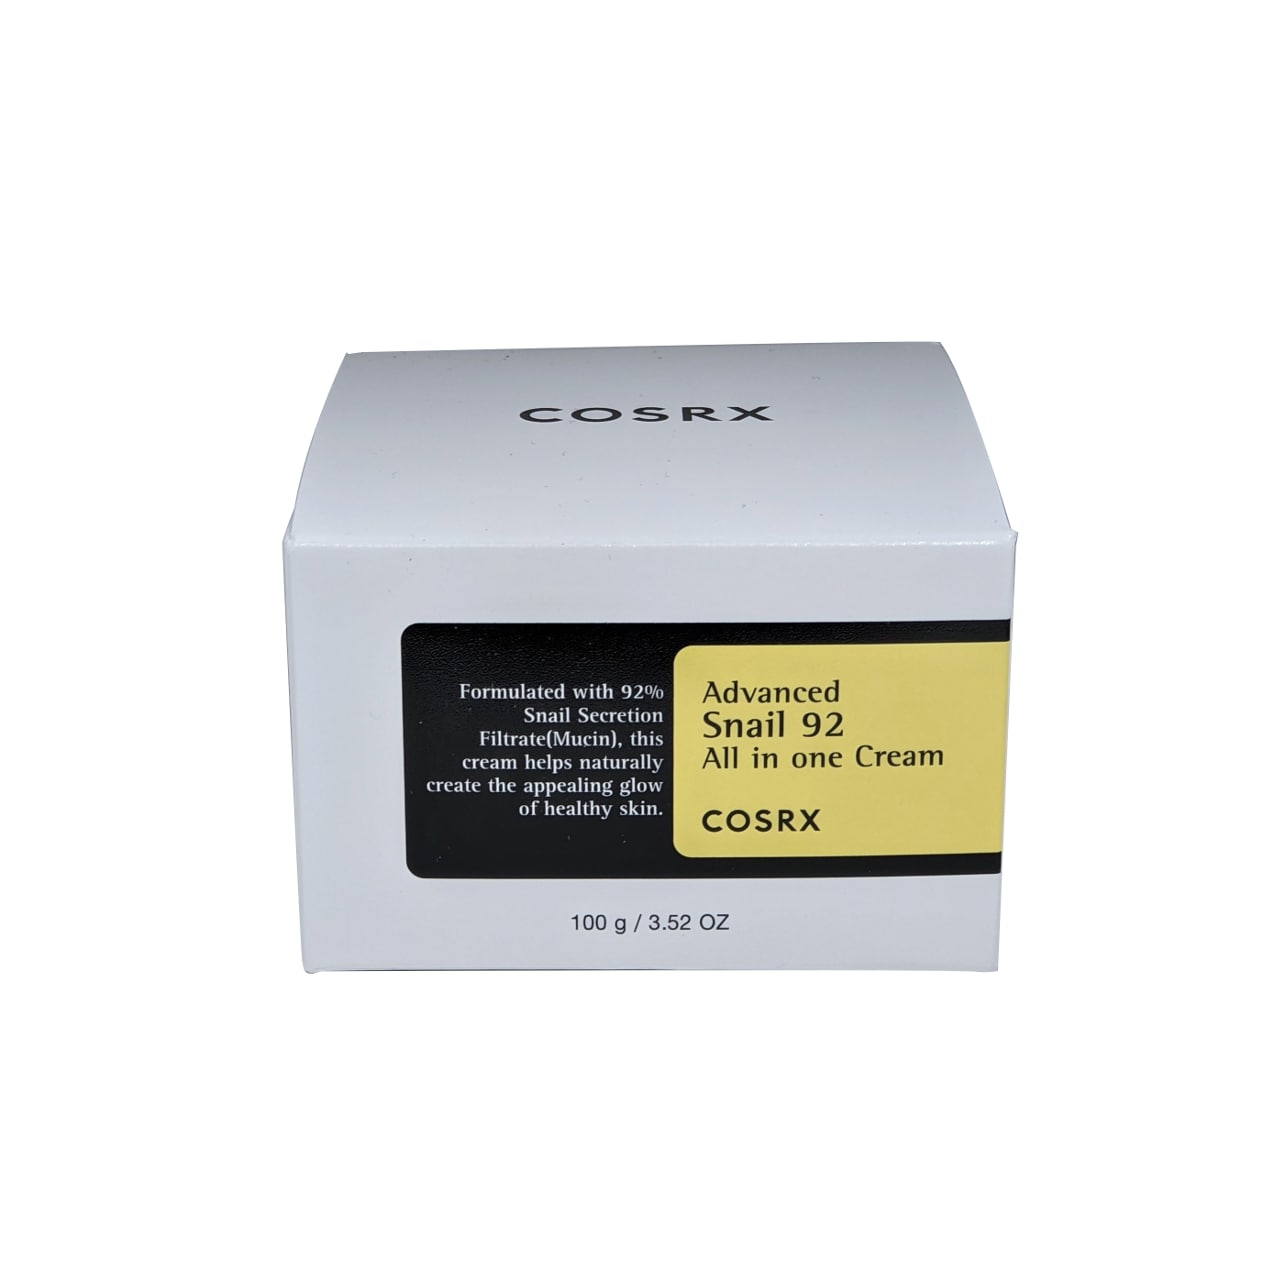 Product label for COSRX Advanced Snail 92 All in One Cream